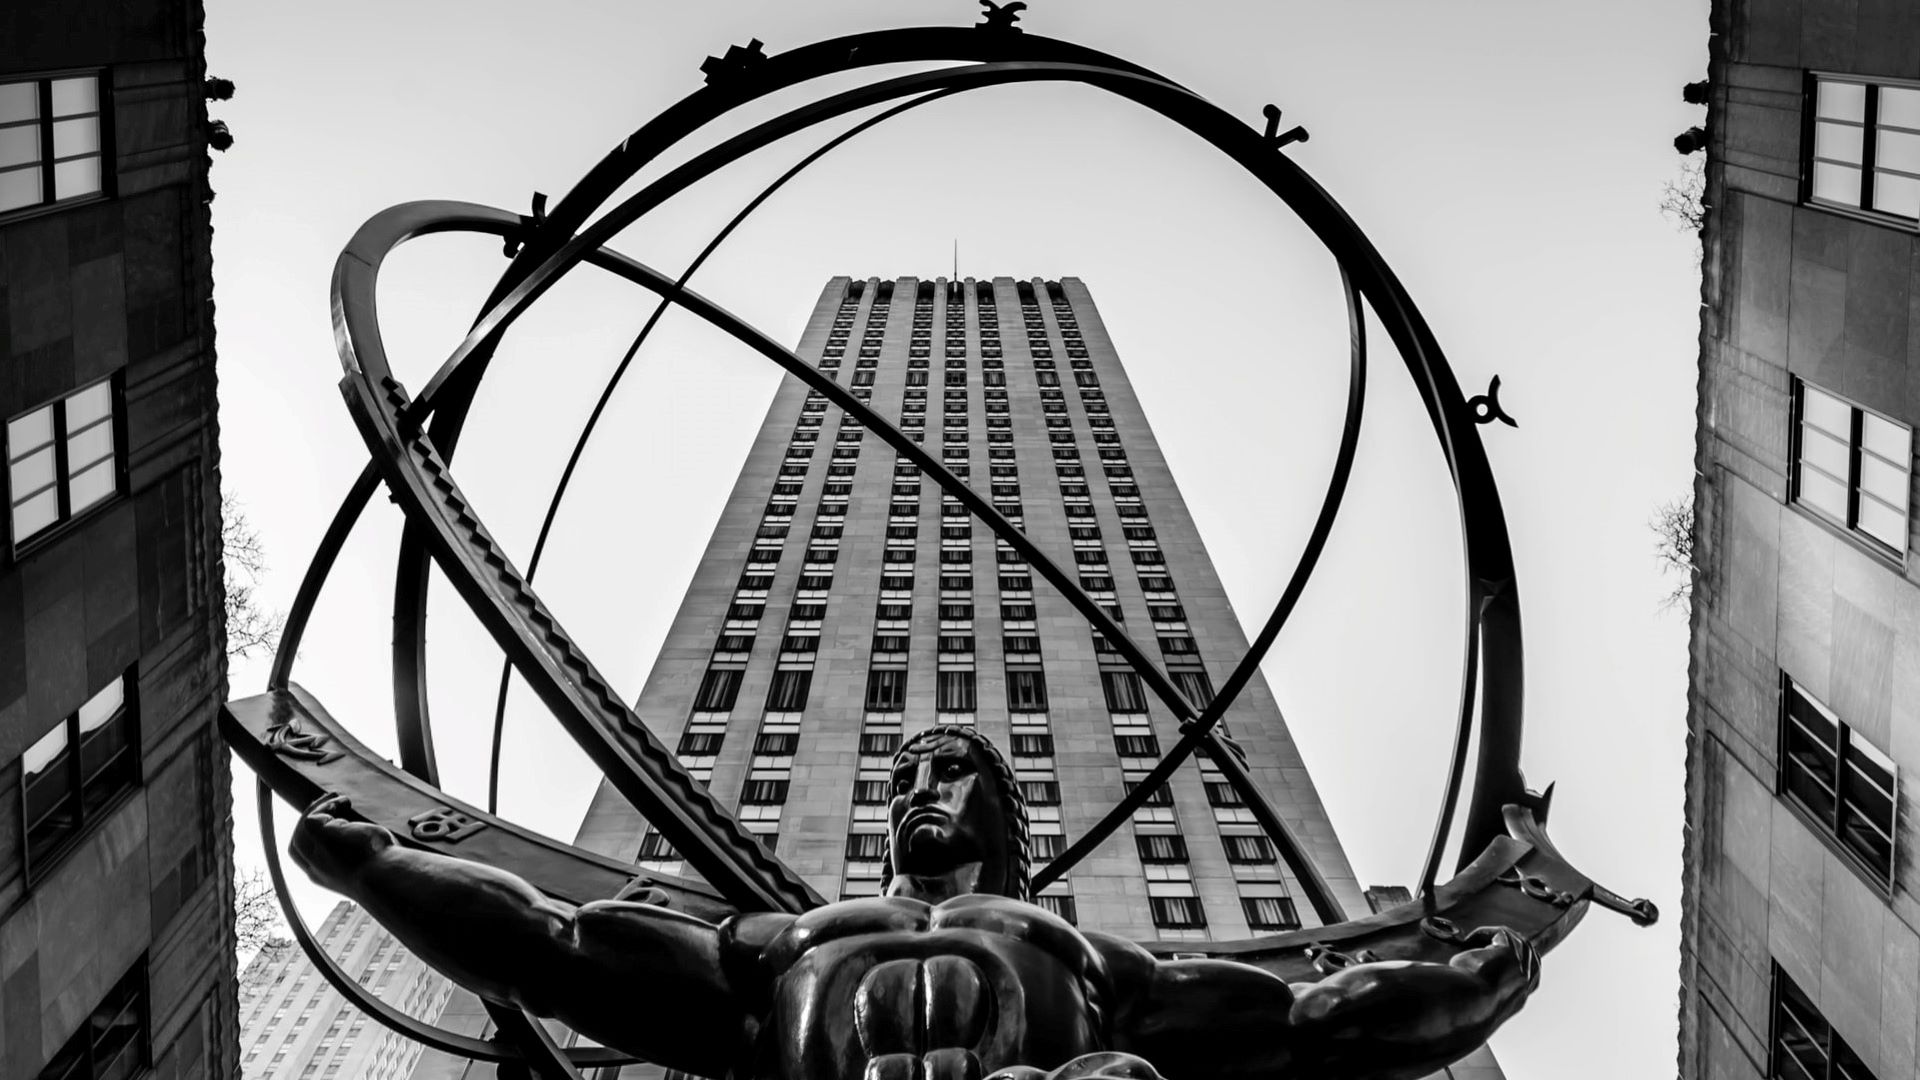 Since its publication in 1957, Ayn Rand's Atlas Shrugged continues to have a lasting impact and remains a cornerstone of pro-liberty literature